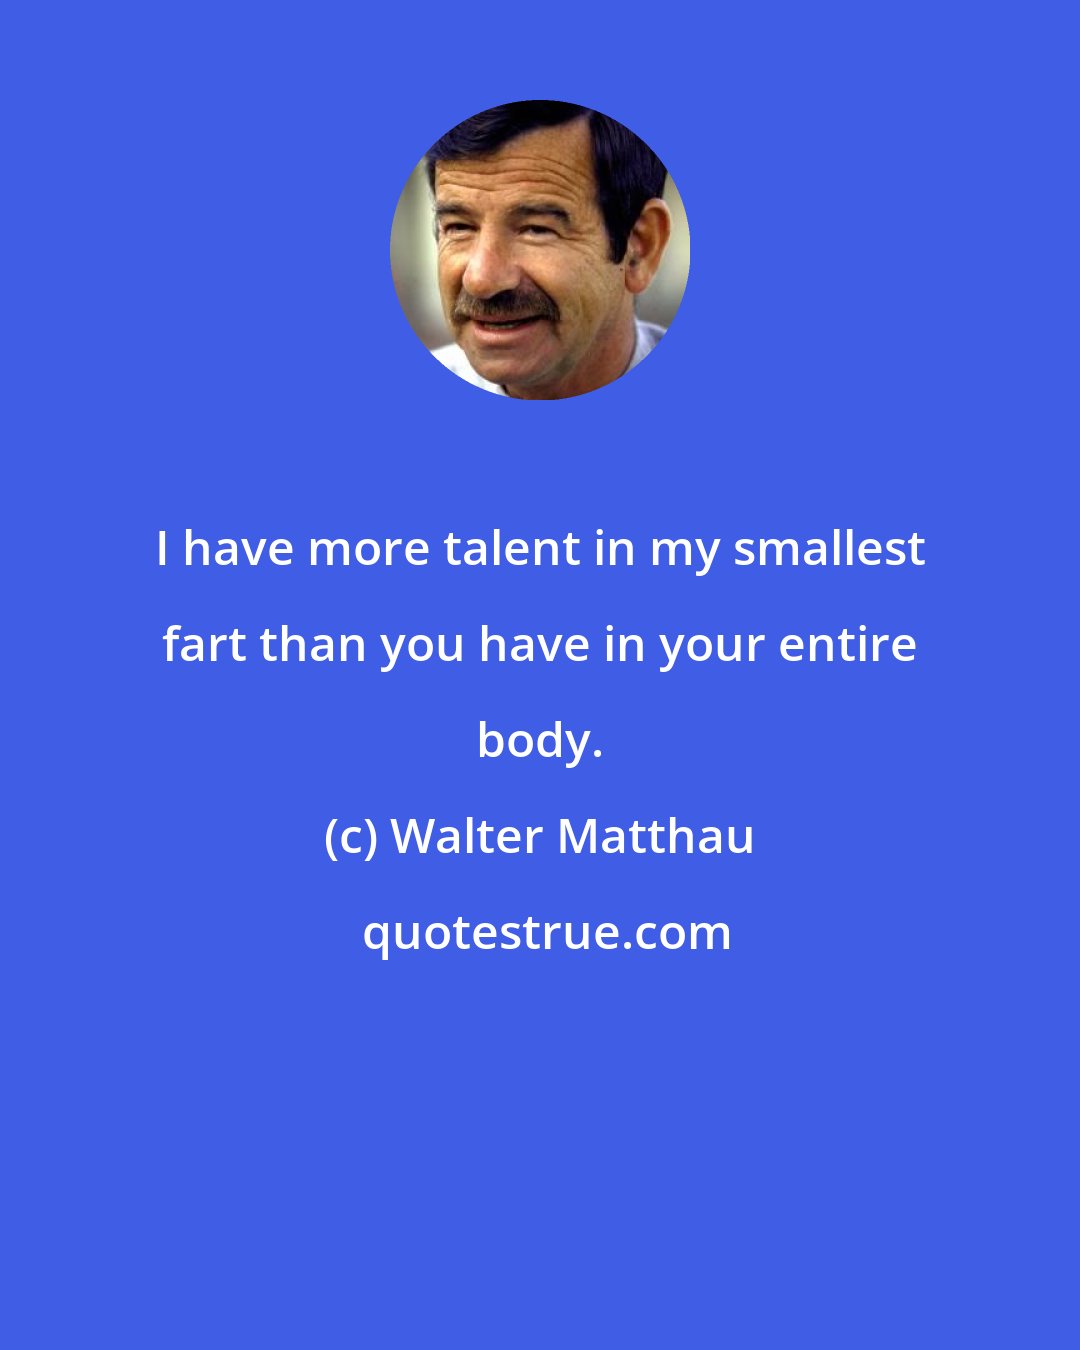 Walter Matthau: I have more talent in my smallest fart than you have in your entire body.